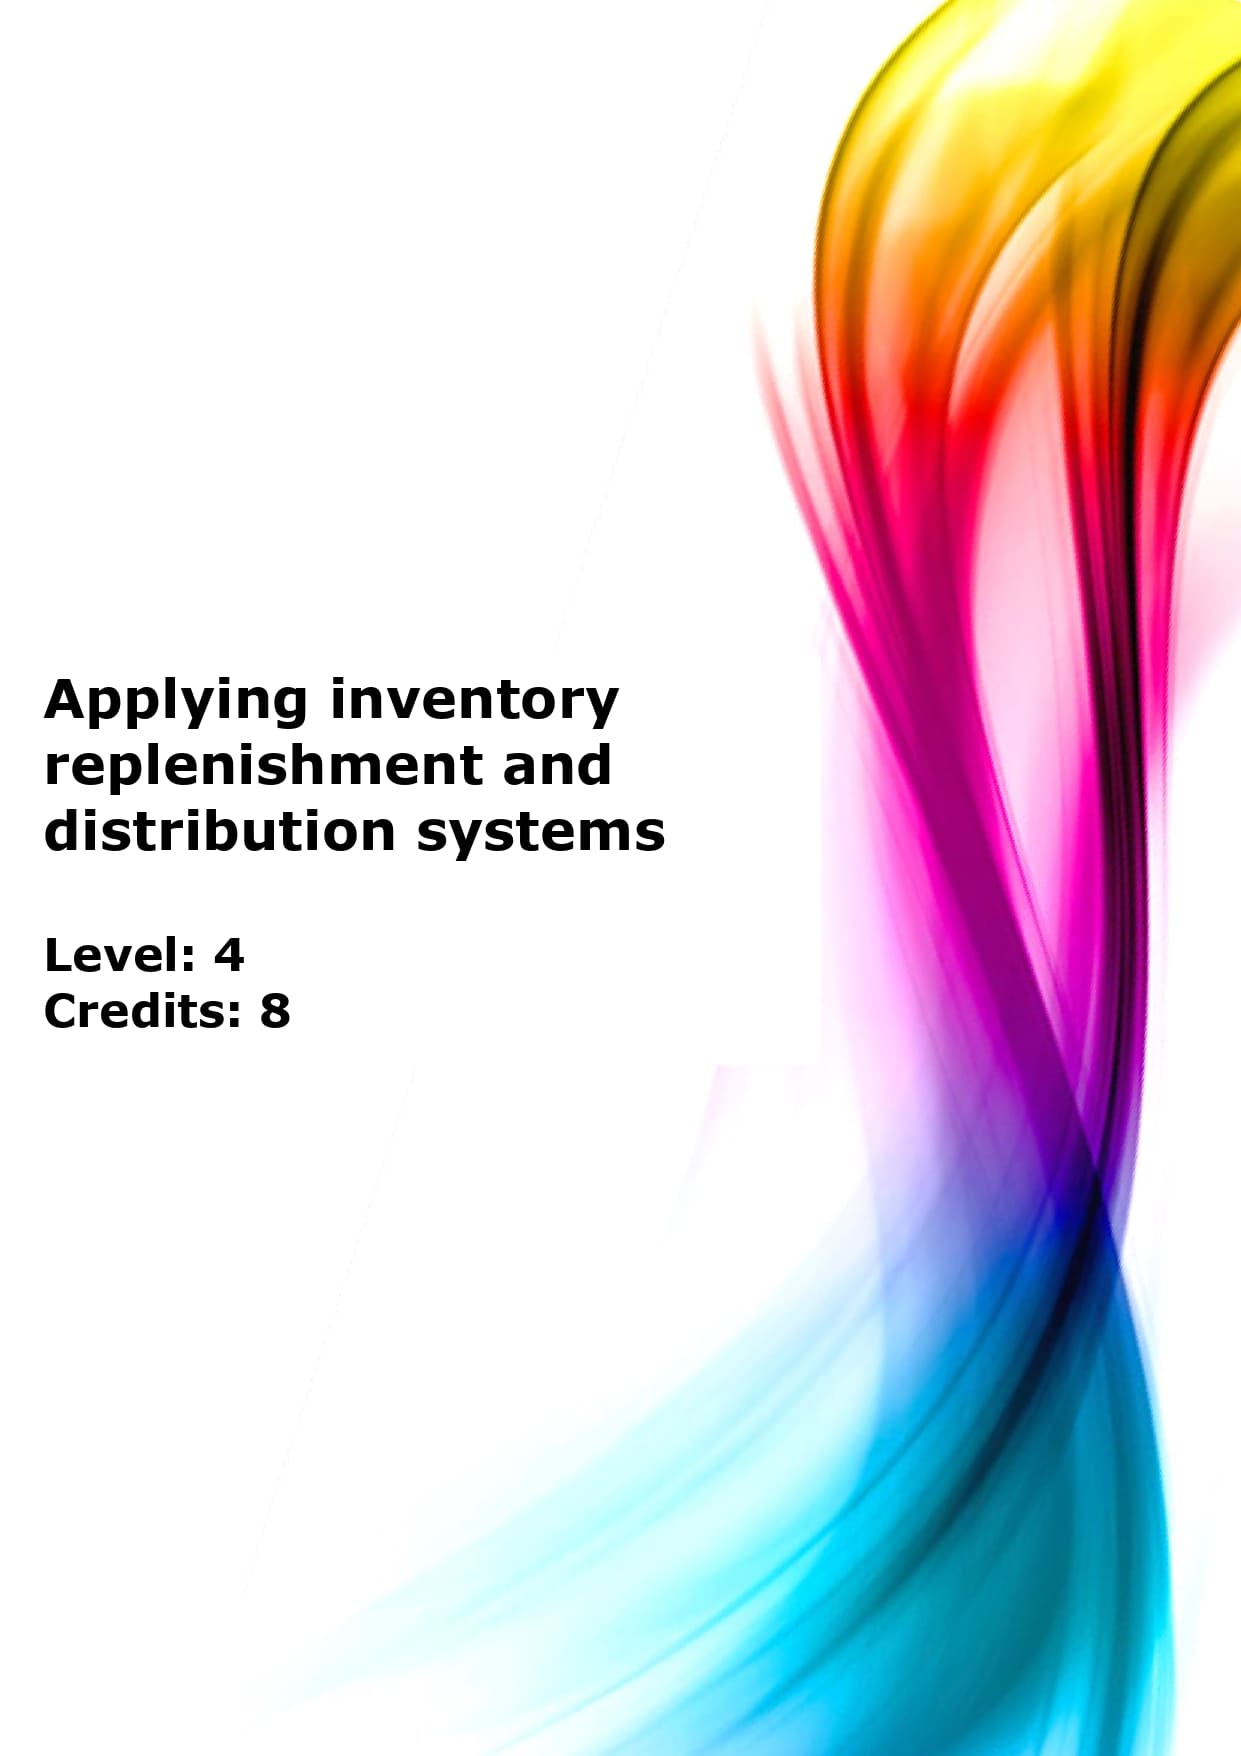 Apply inventory replenishment and distribution systems US